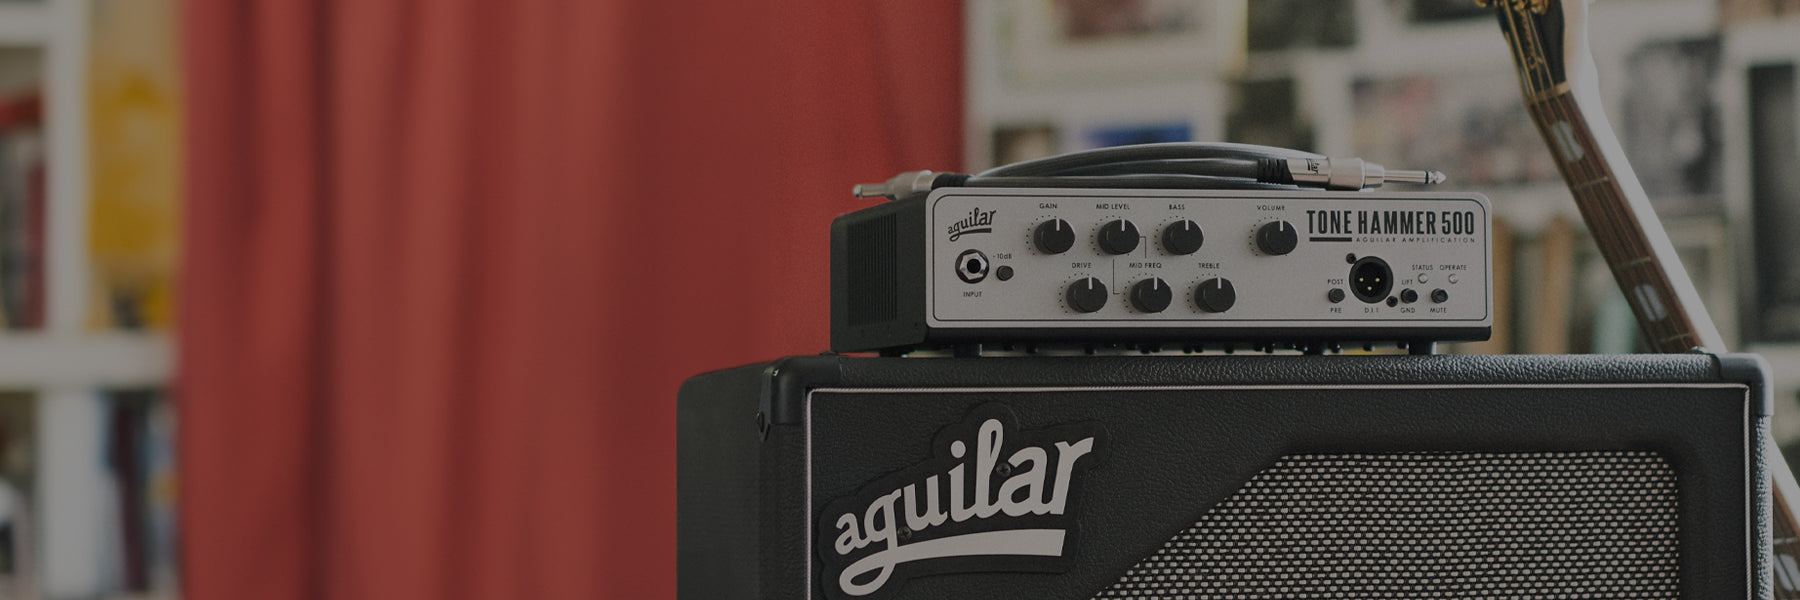 aguilar Tone Hammer bass amps lifestyle